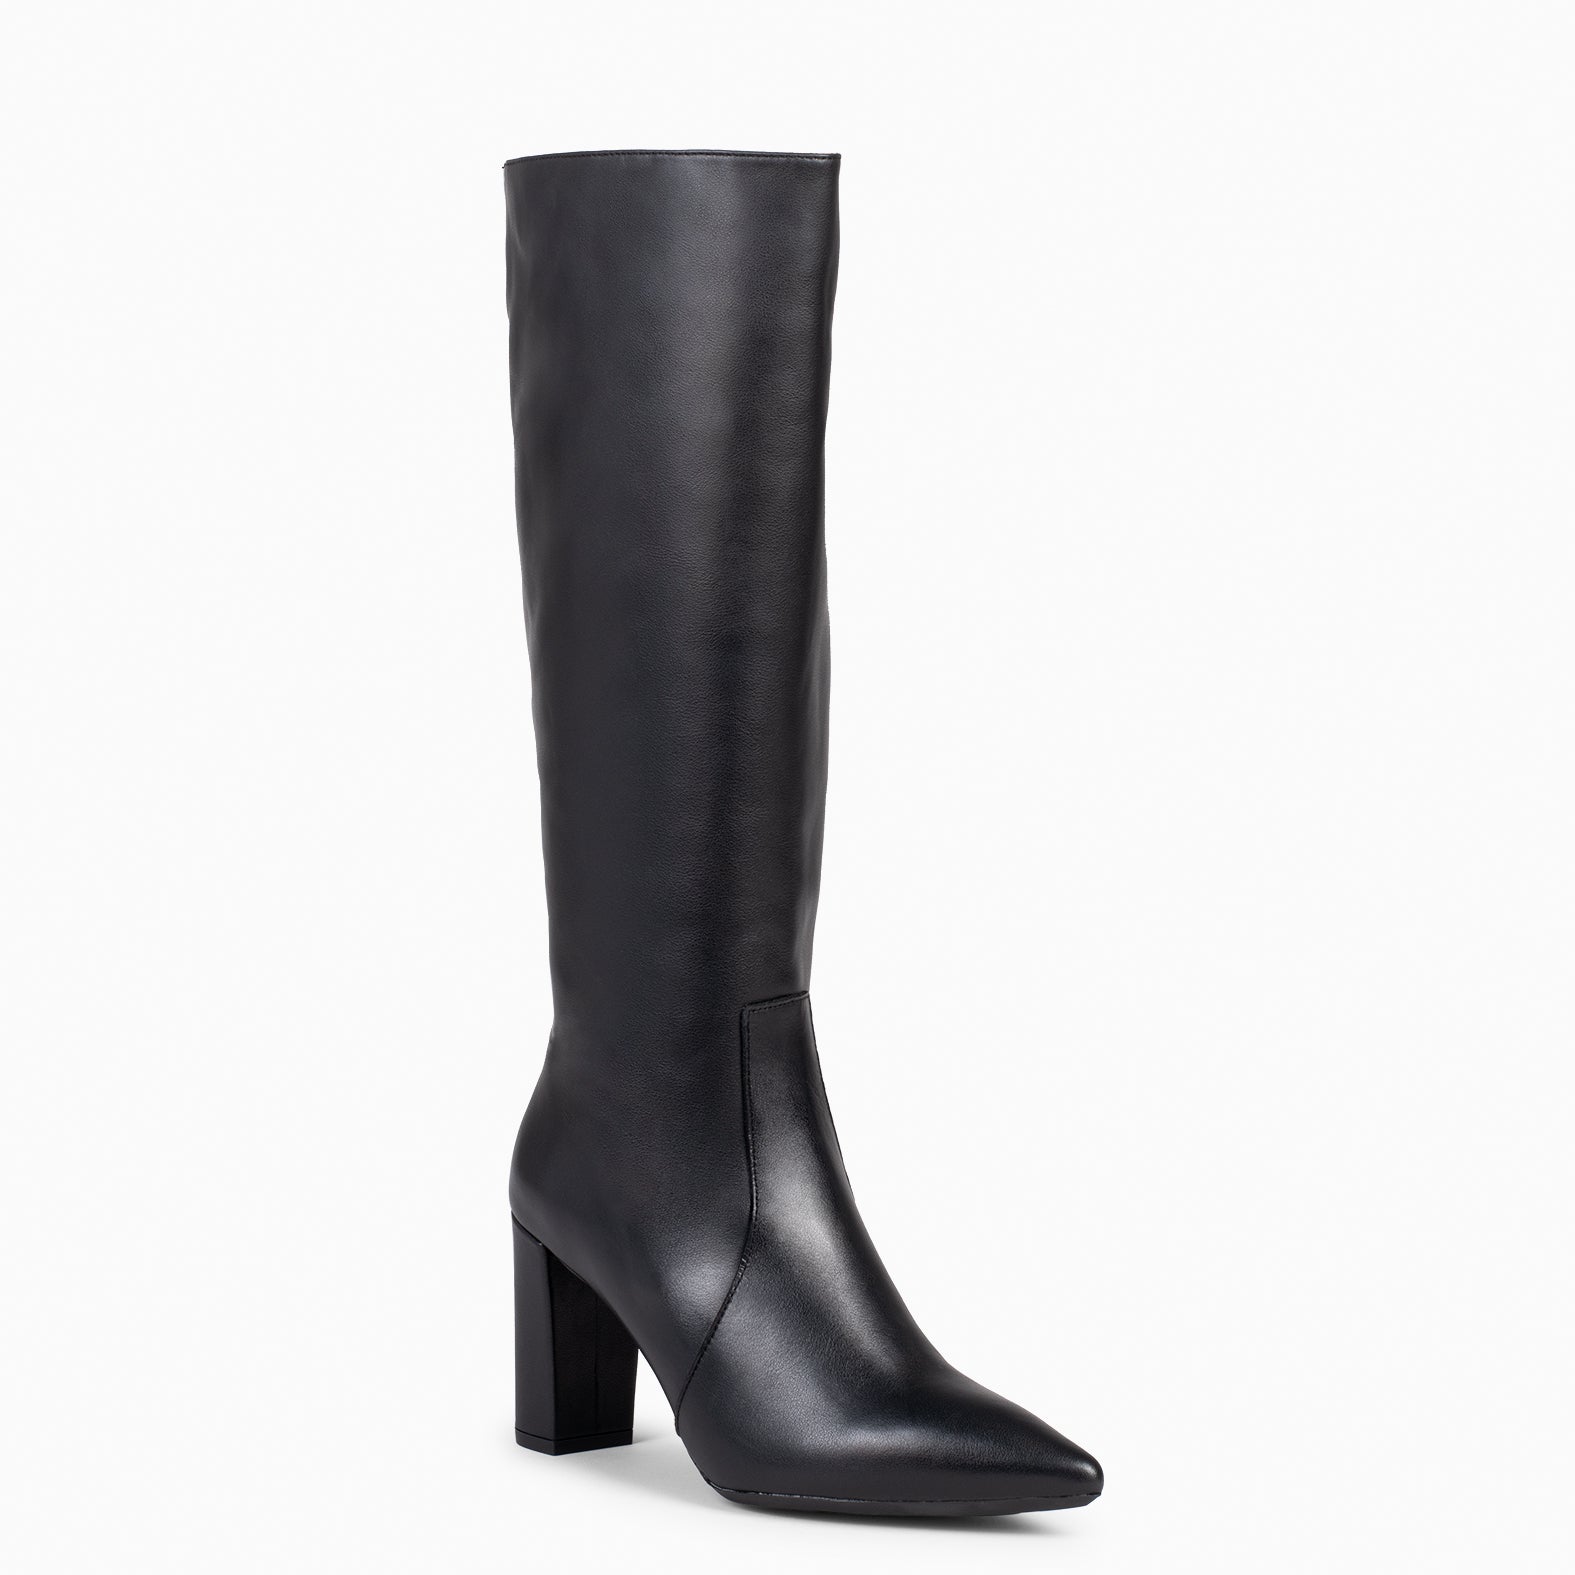 URBAN BOOT - BLACK high boots with zipper nappa